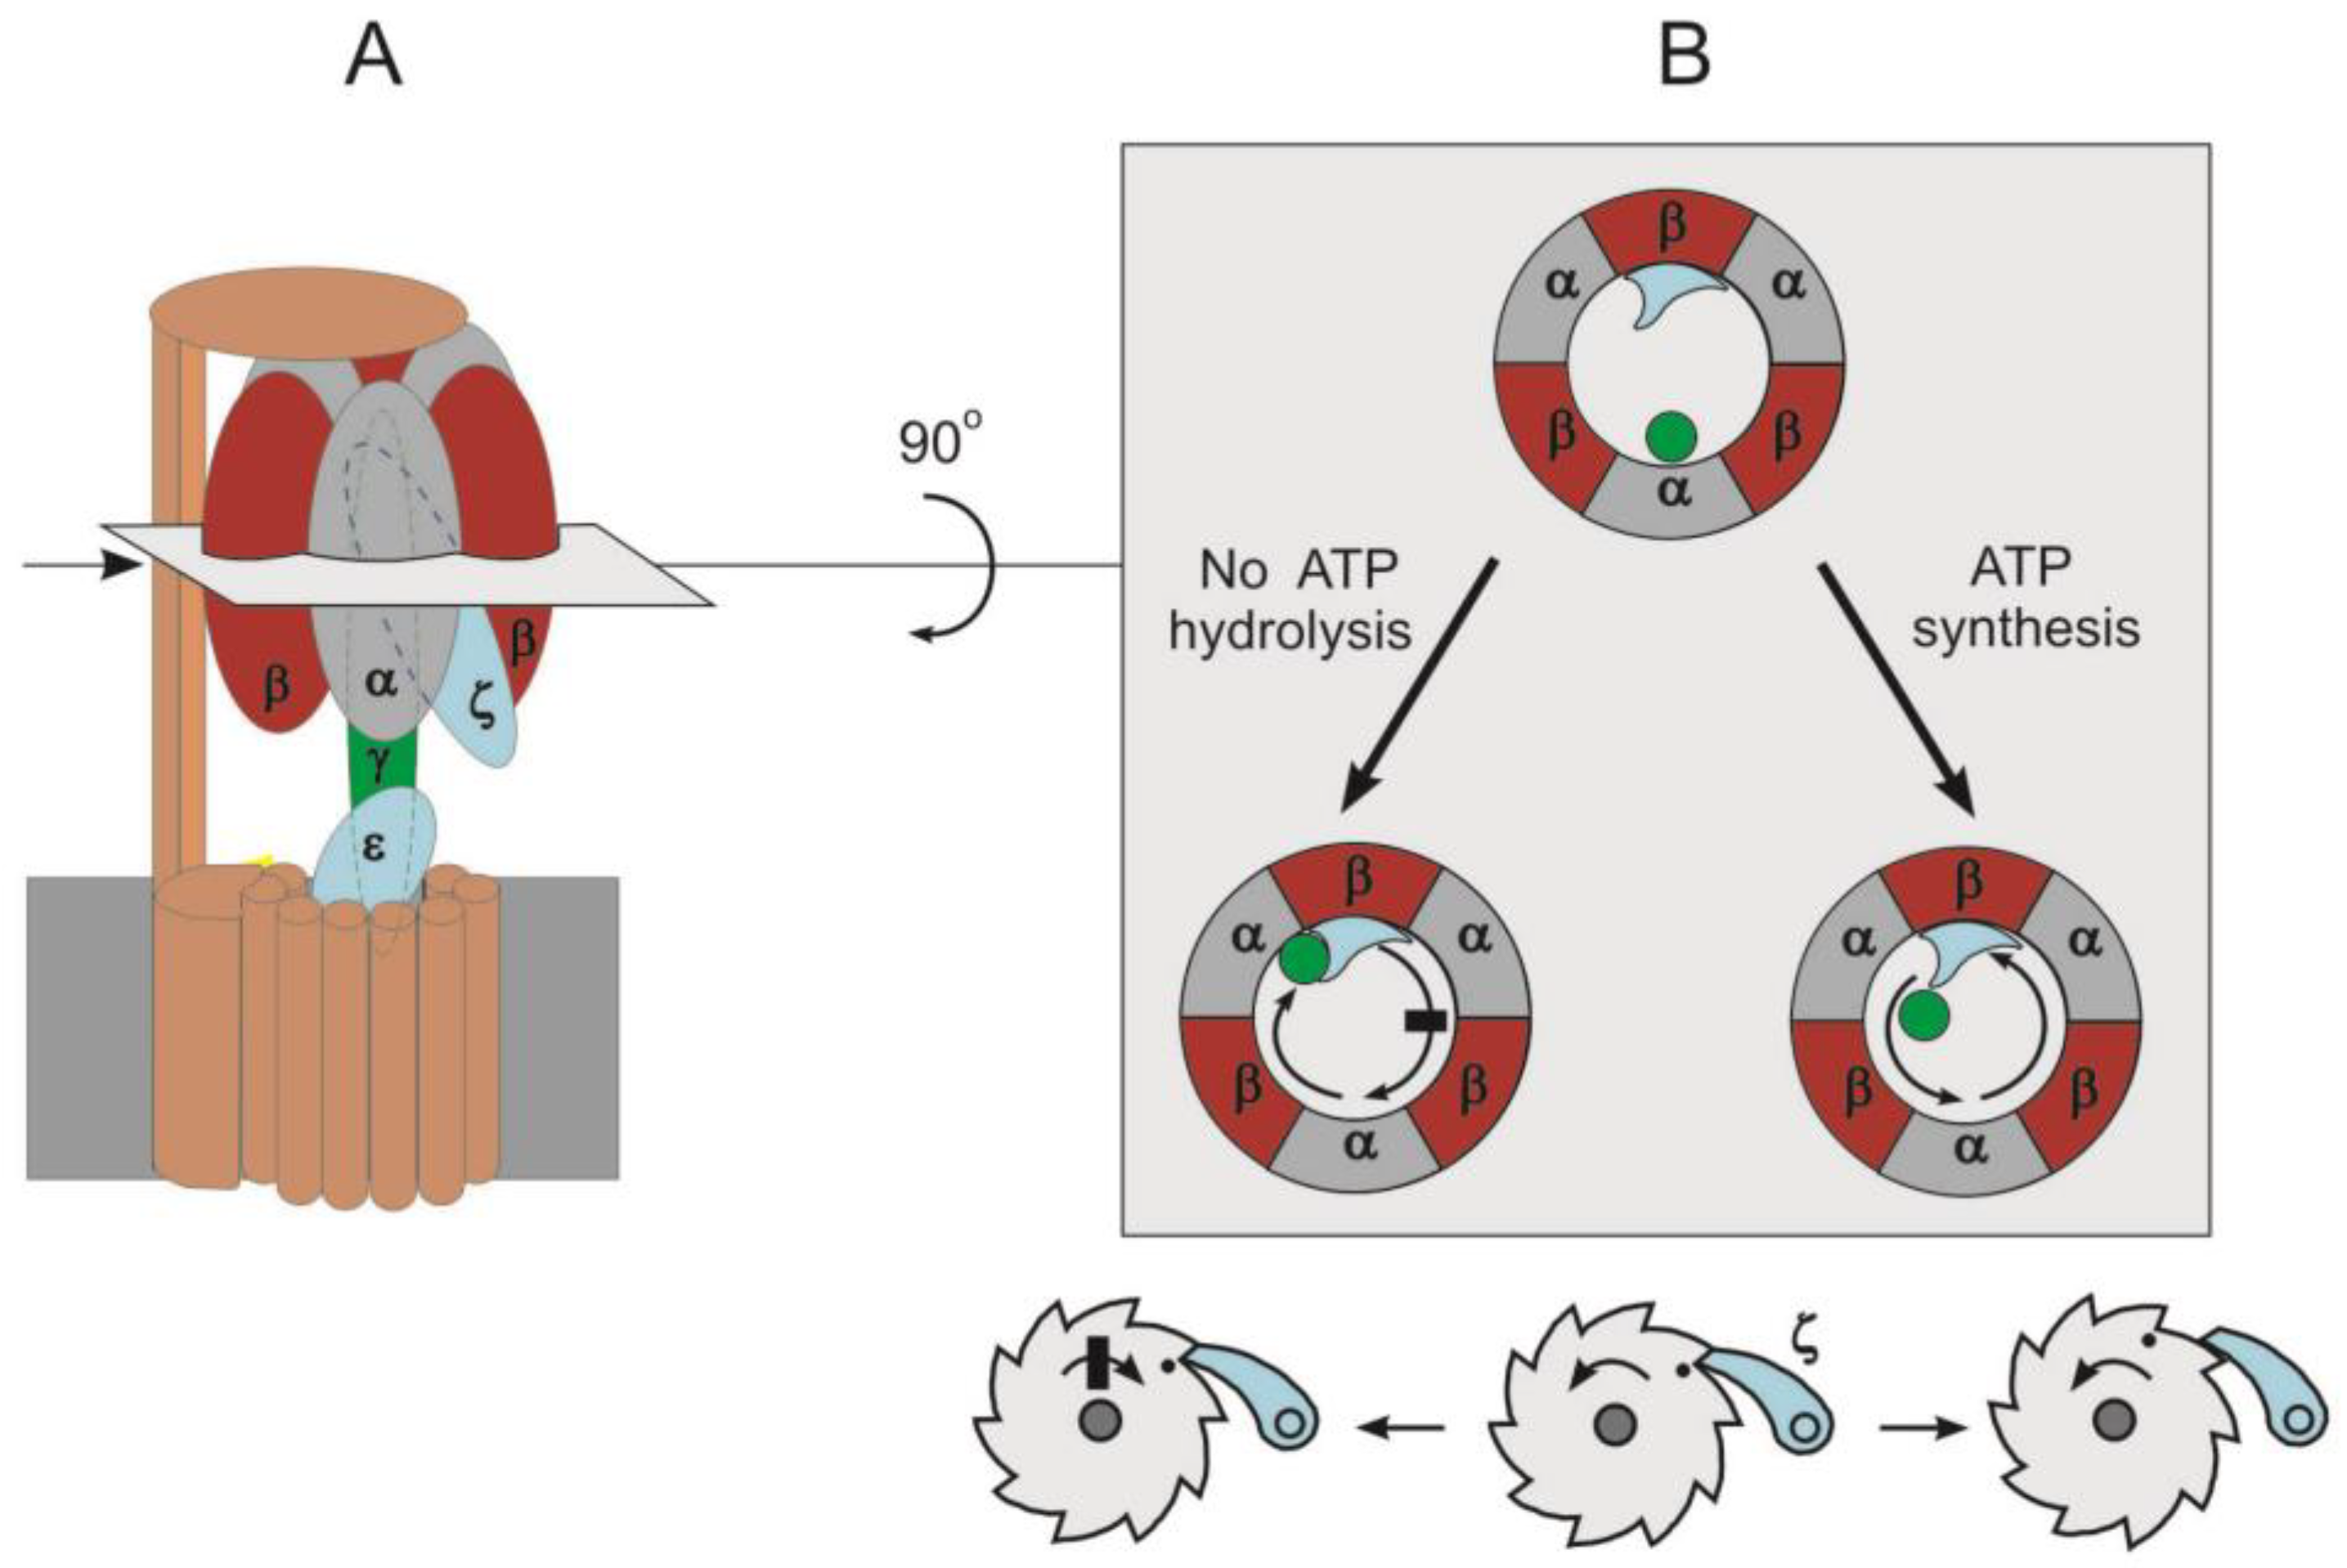 Frontiers | CryoEM Reveals the Complexity and Diversity of ATP Synthases